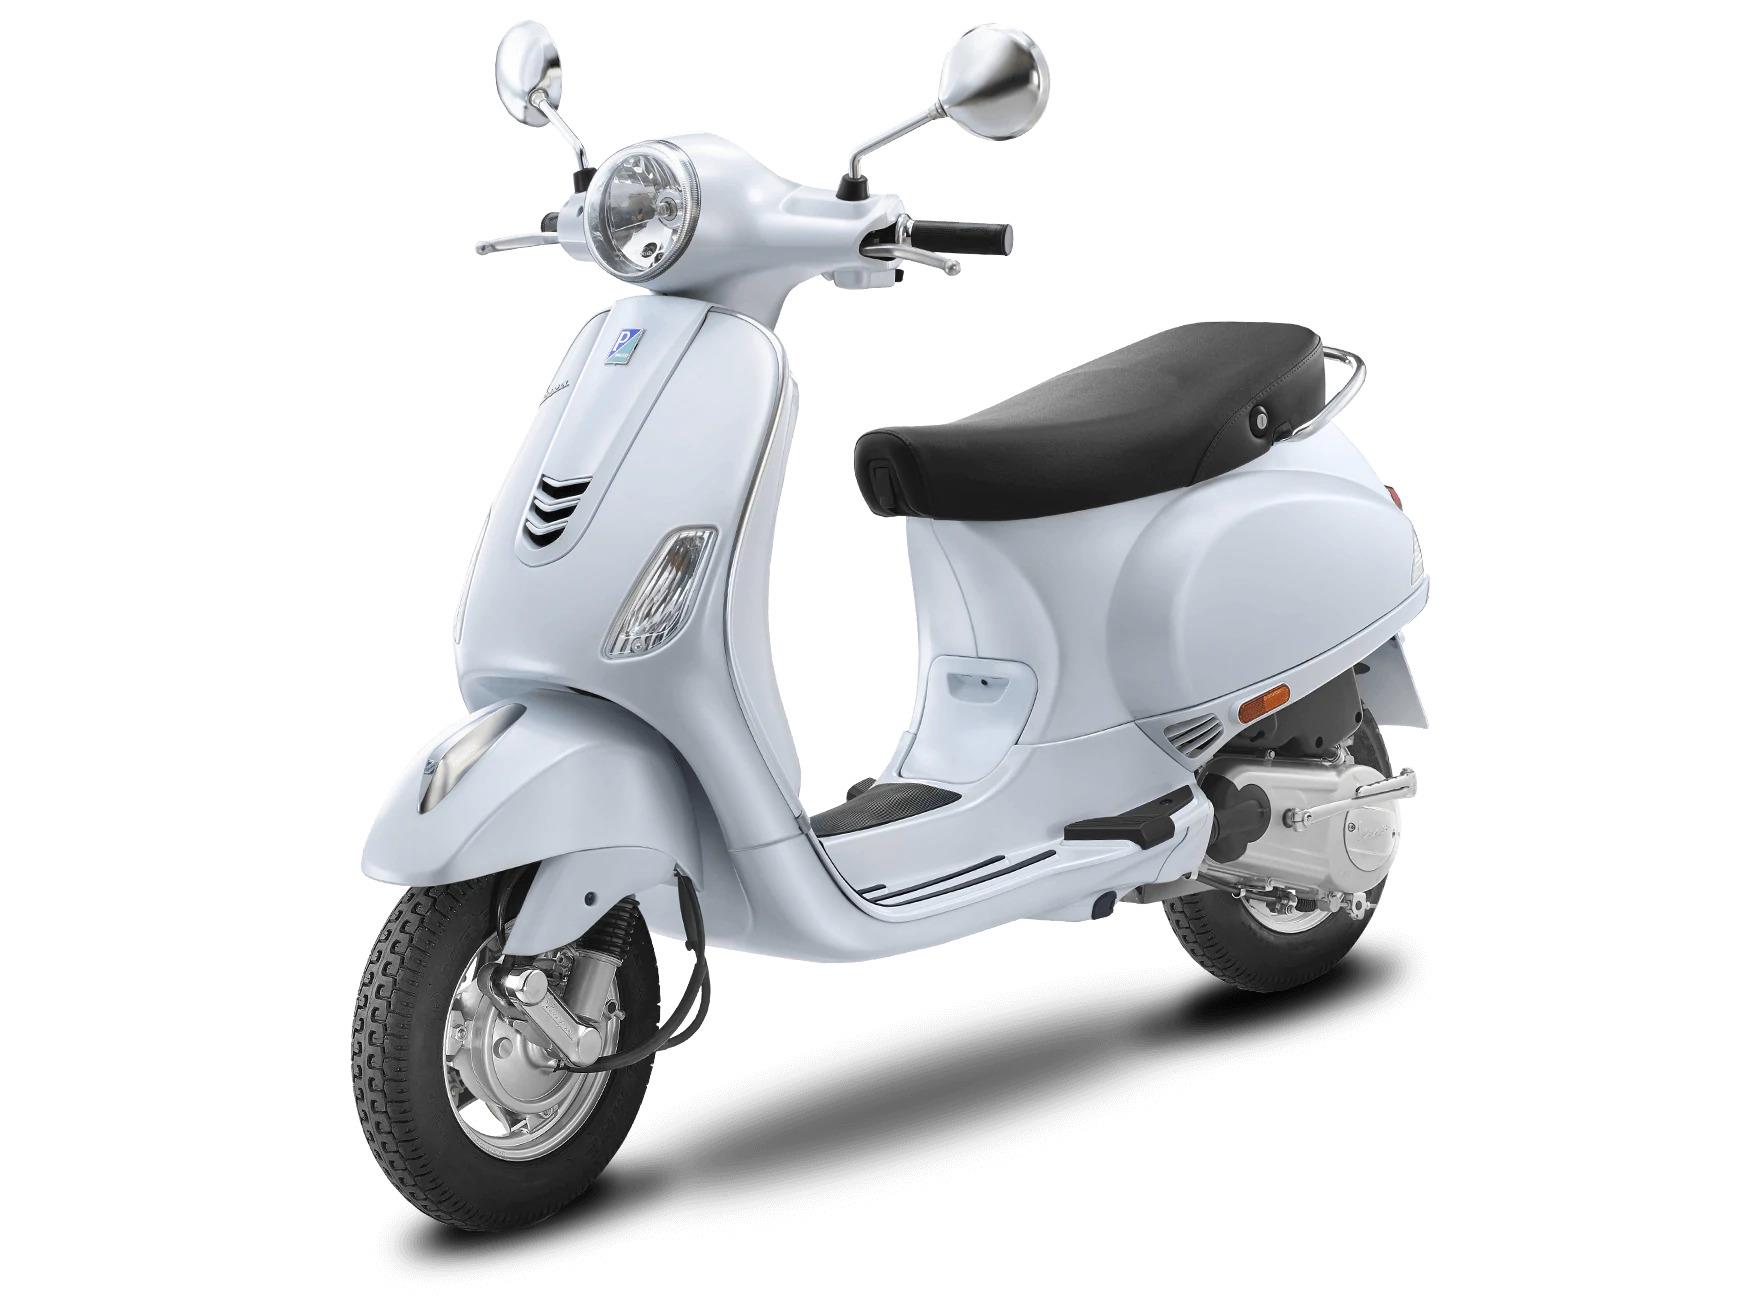 2023 Vespa Lx 125 Bs6 Price In India [Full Specifications]